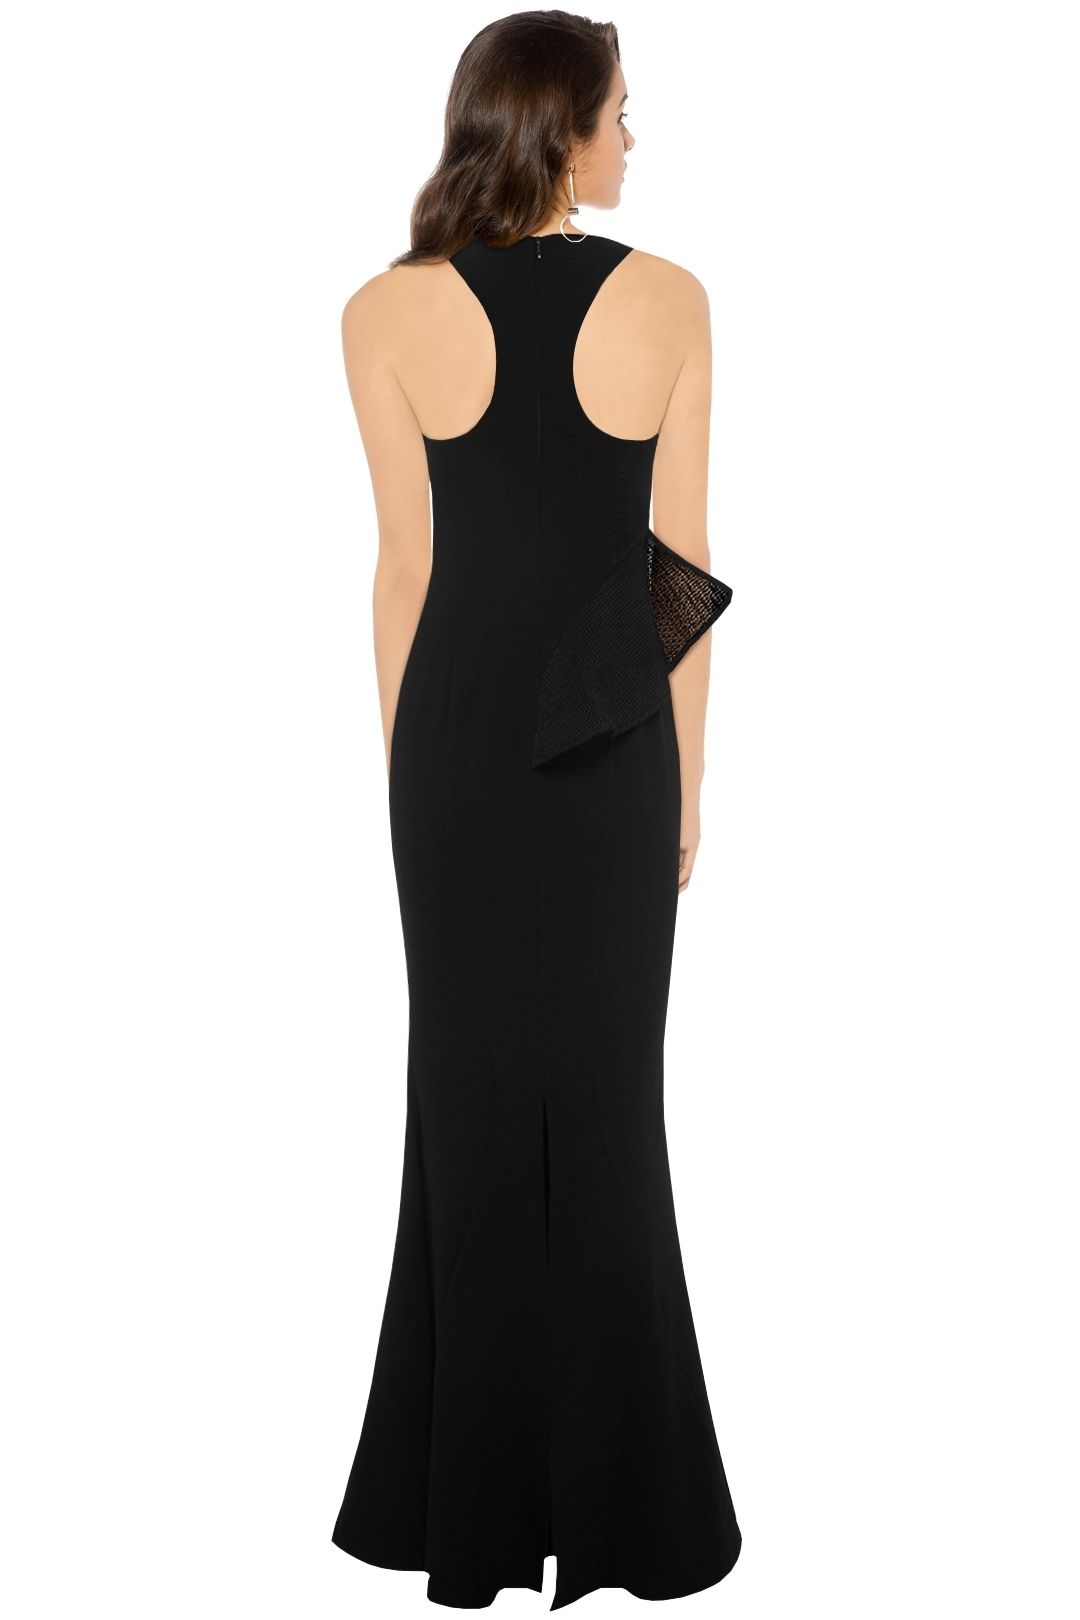 Olivia Maxi Dress by Sheike for Hire | GlamCorner